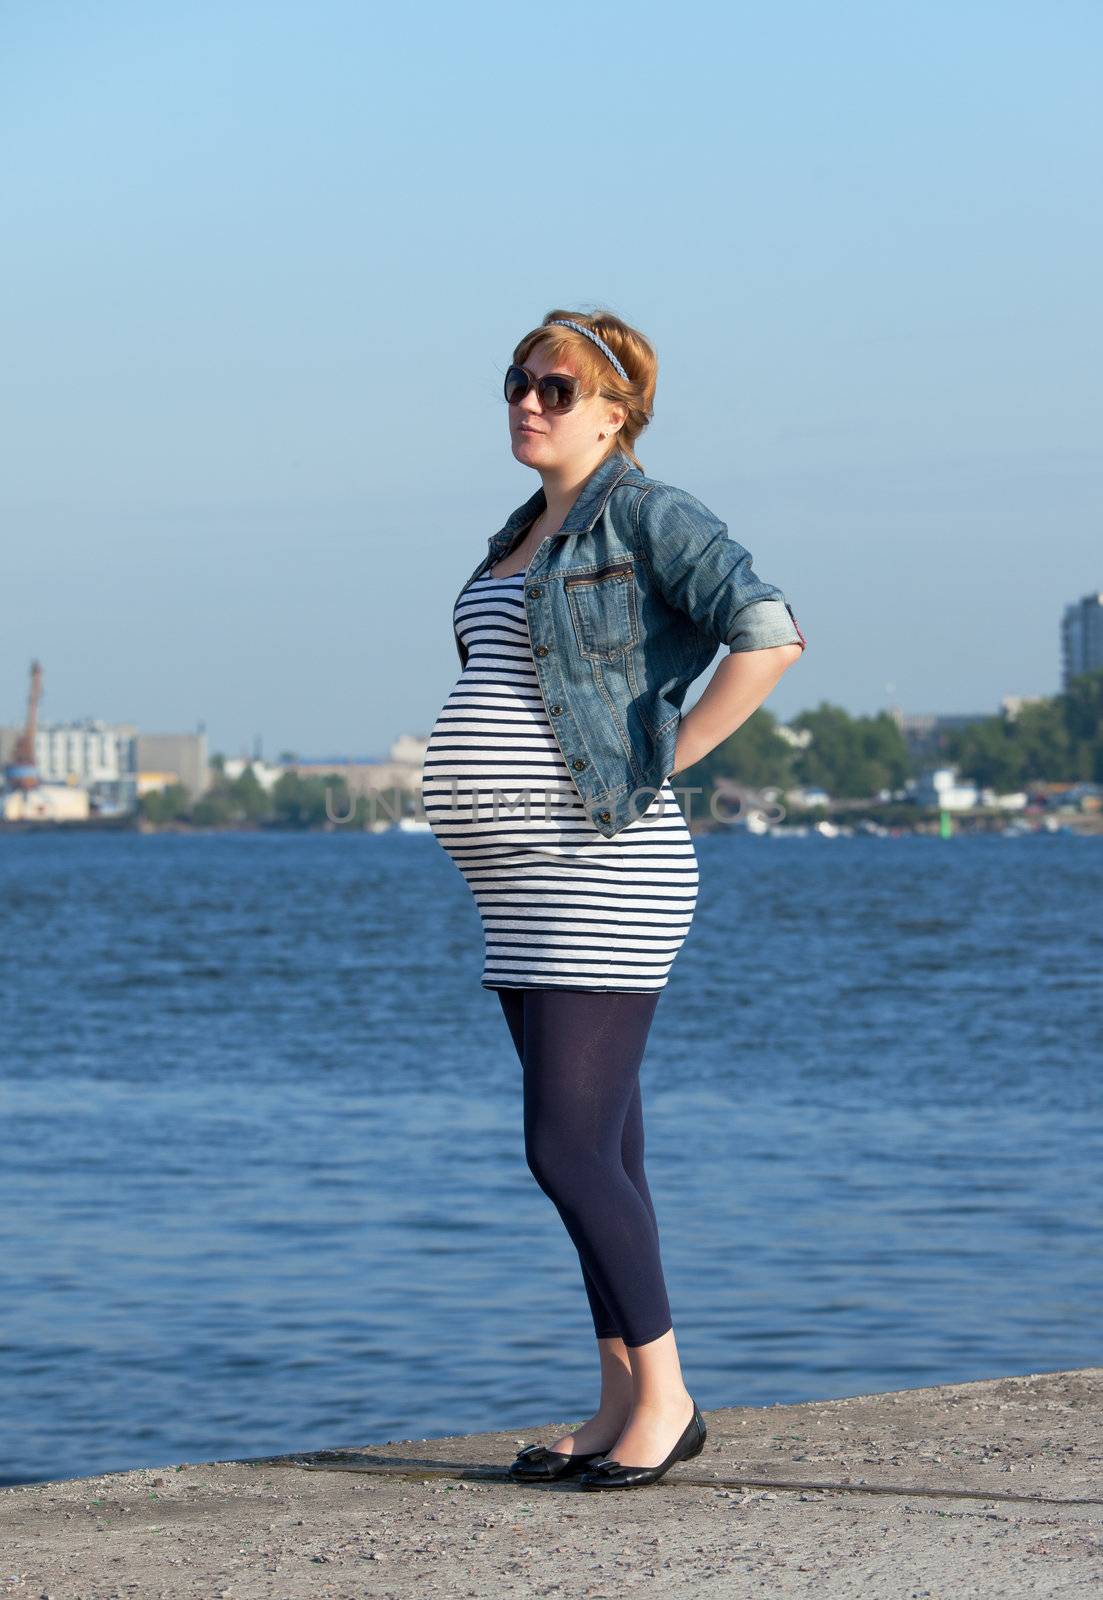 Pregnant Woman on Pier in the Urban Landscape